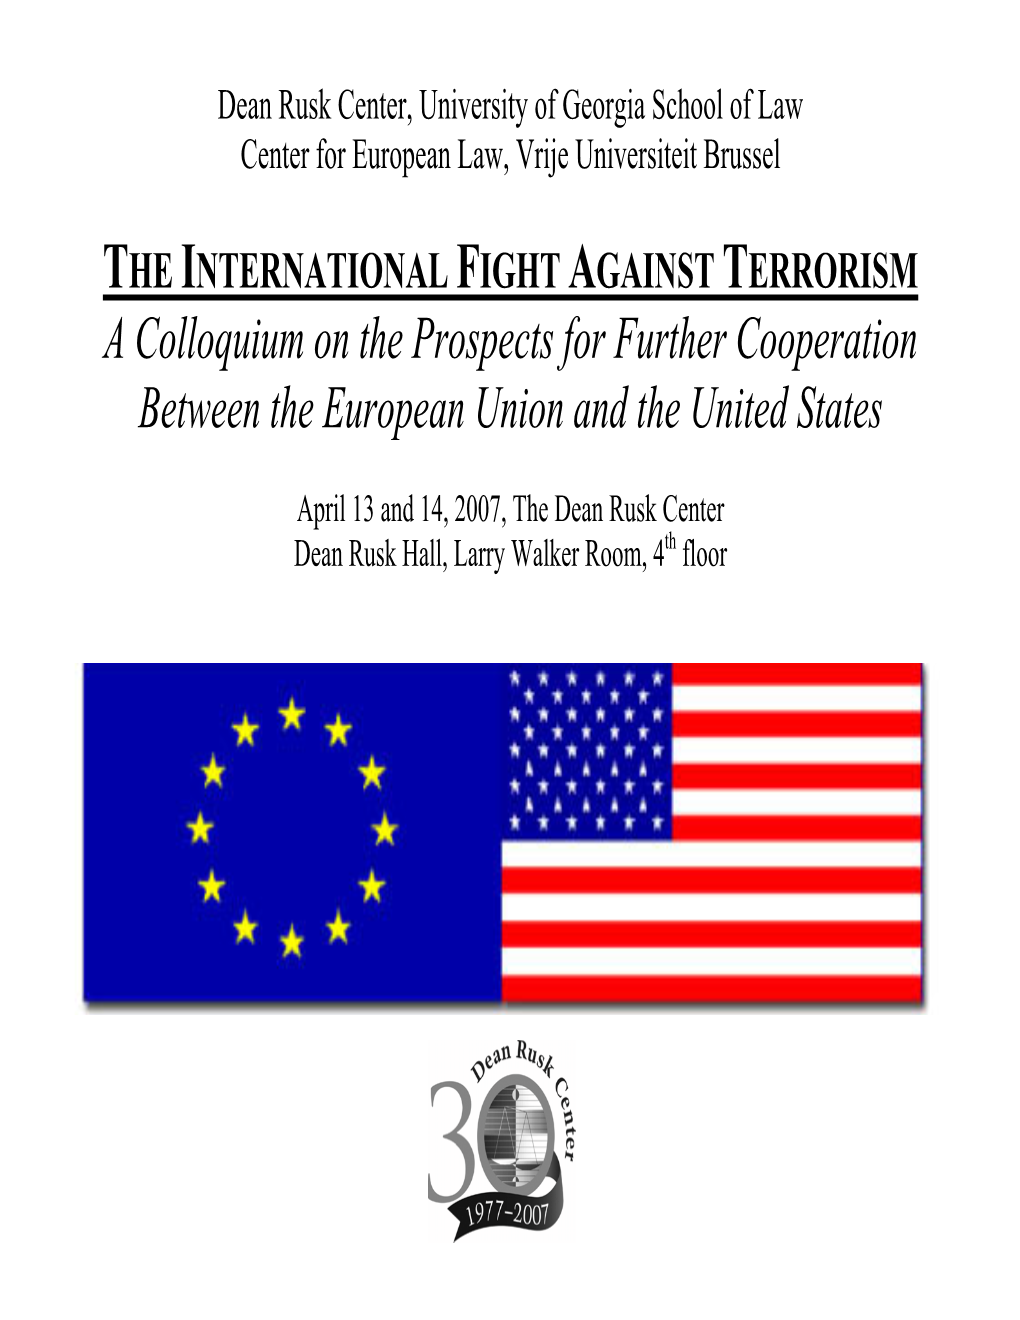 THE INTERNATIONAL FIGHT AGAINST TERRORISM a Colloquium on the Prospects for Further Cooperation Between the European Union and the United States